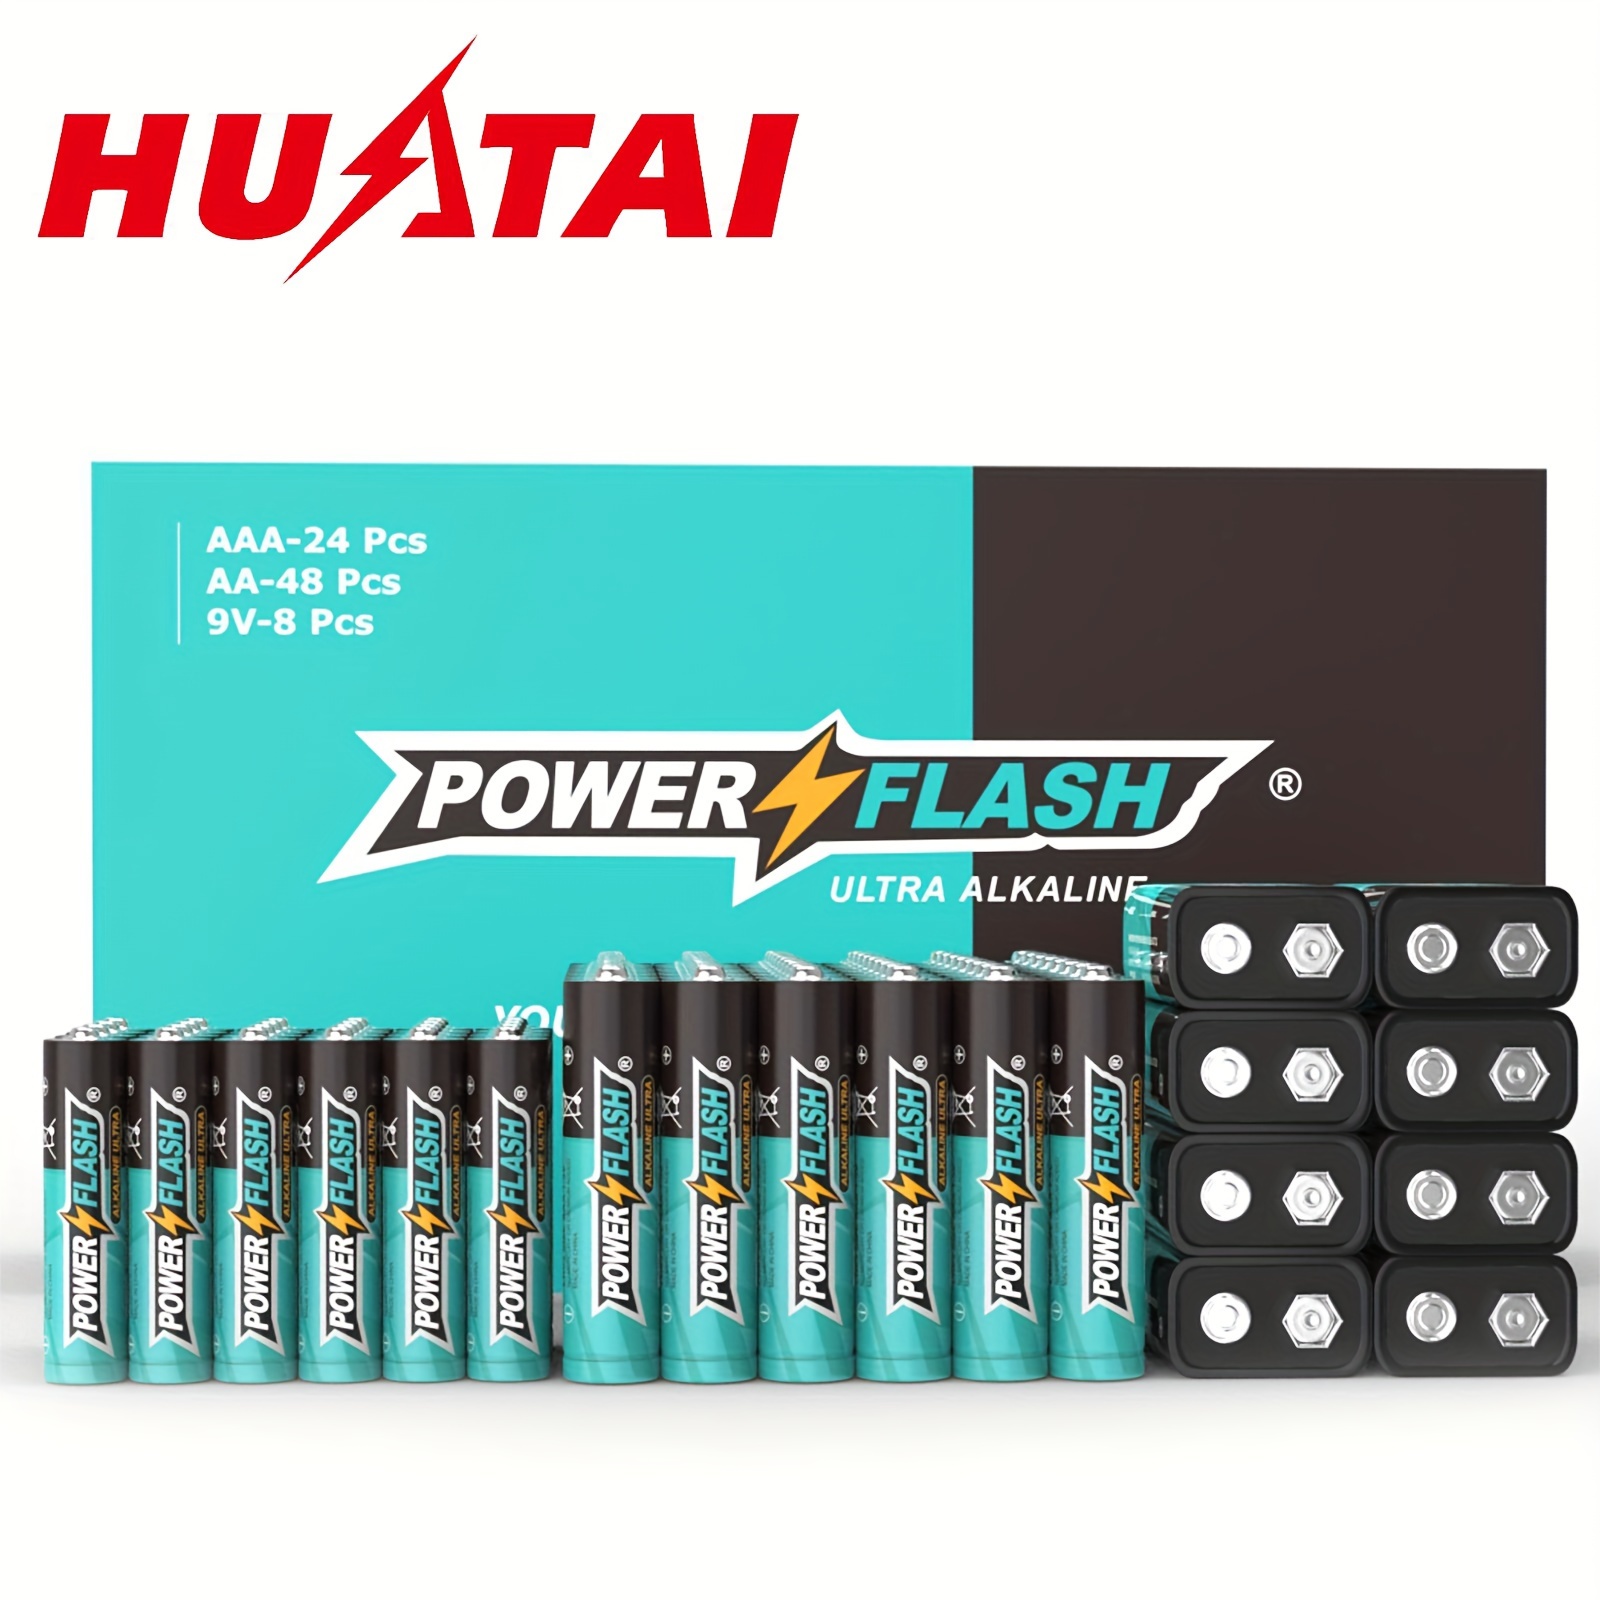 

Huatai Powerflash Alkaline Long-lasting Batteries, Value Pack, Set Of 24 Aaa And 48 Aa And 8 Pcs 9v Batteries For Various Household Device